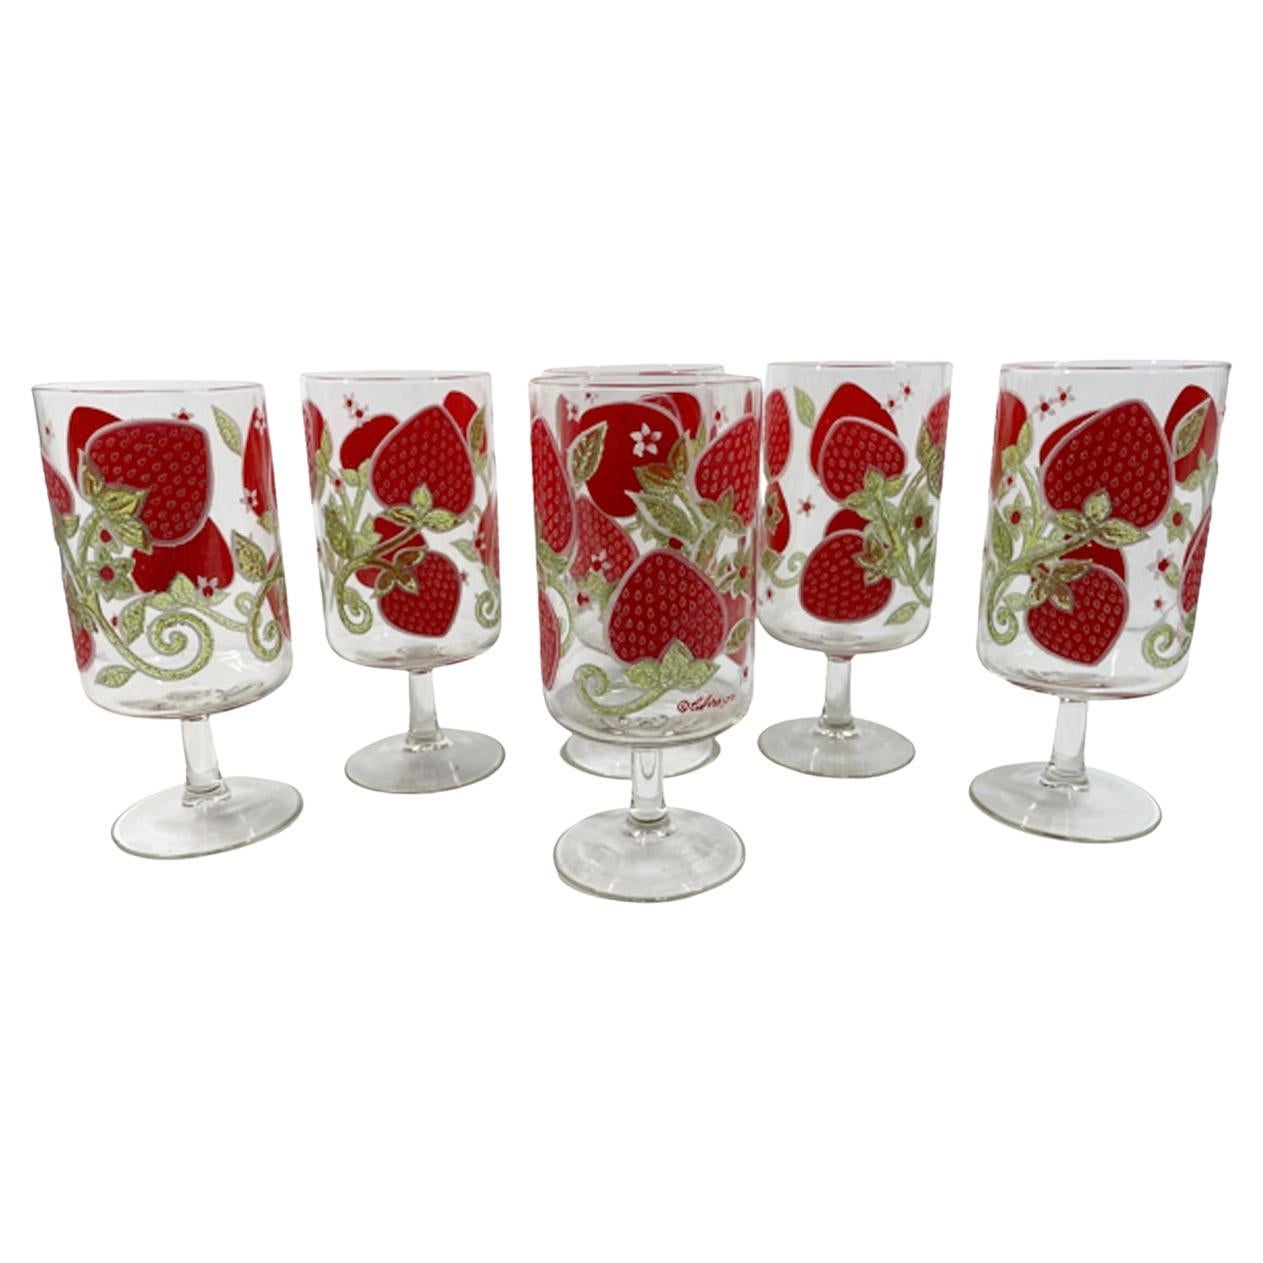 Six Culver, LTD Stemmed Coolers w/ Strawberry Pattern in Red with Green & White